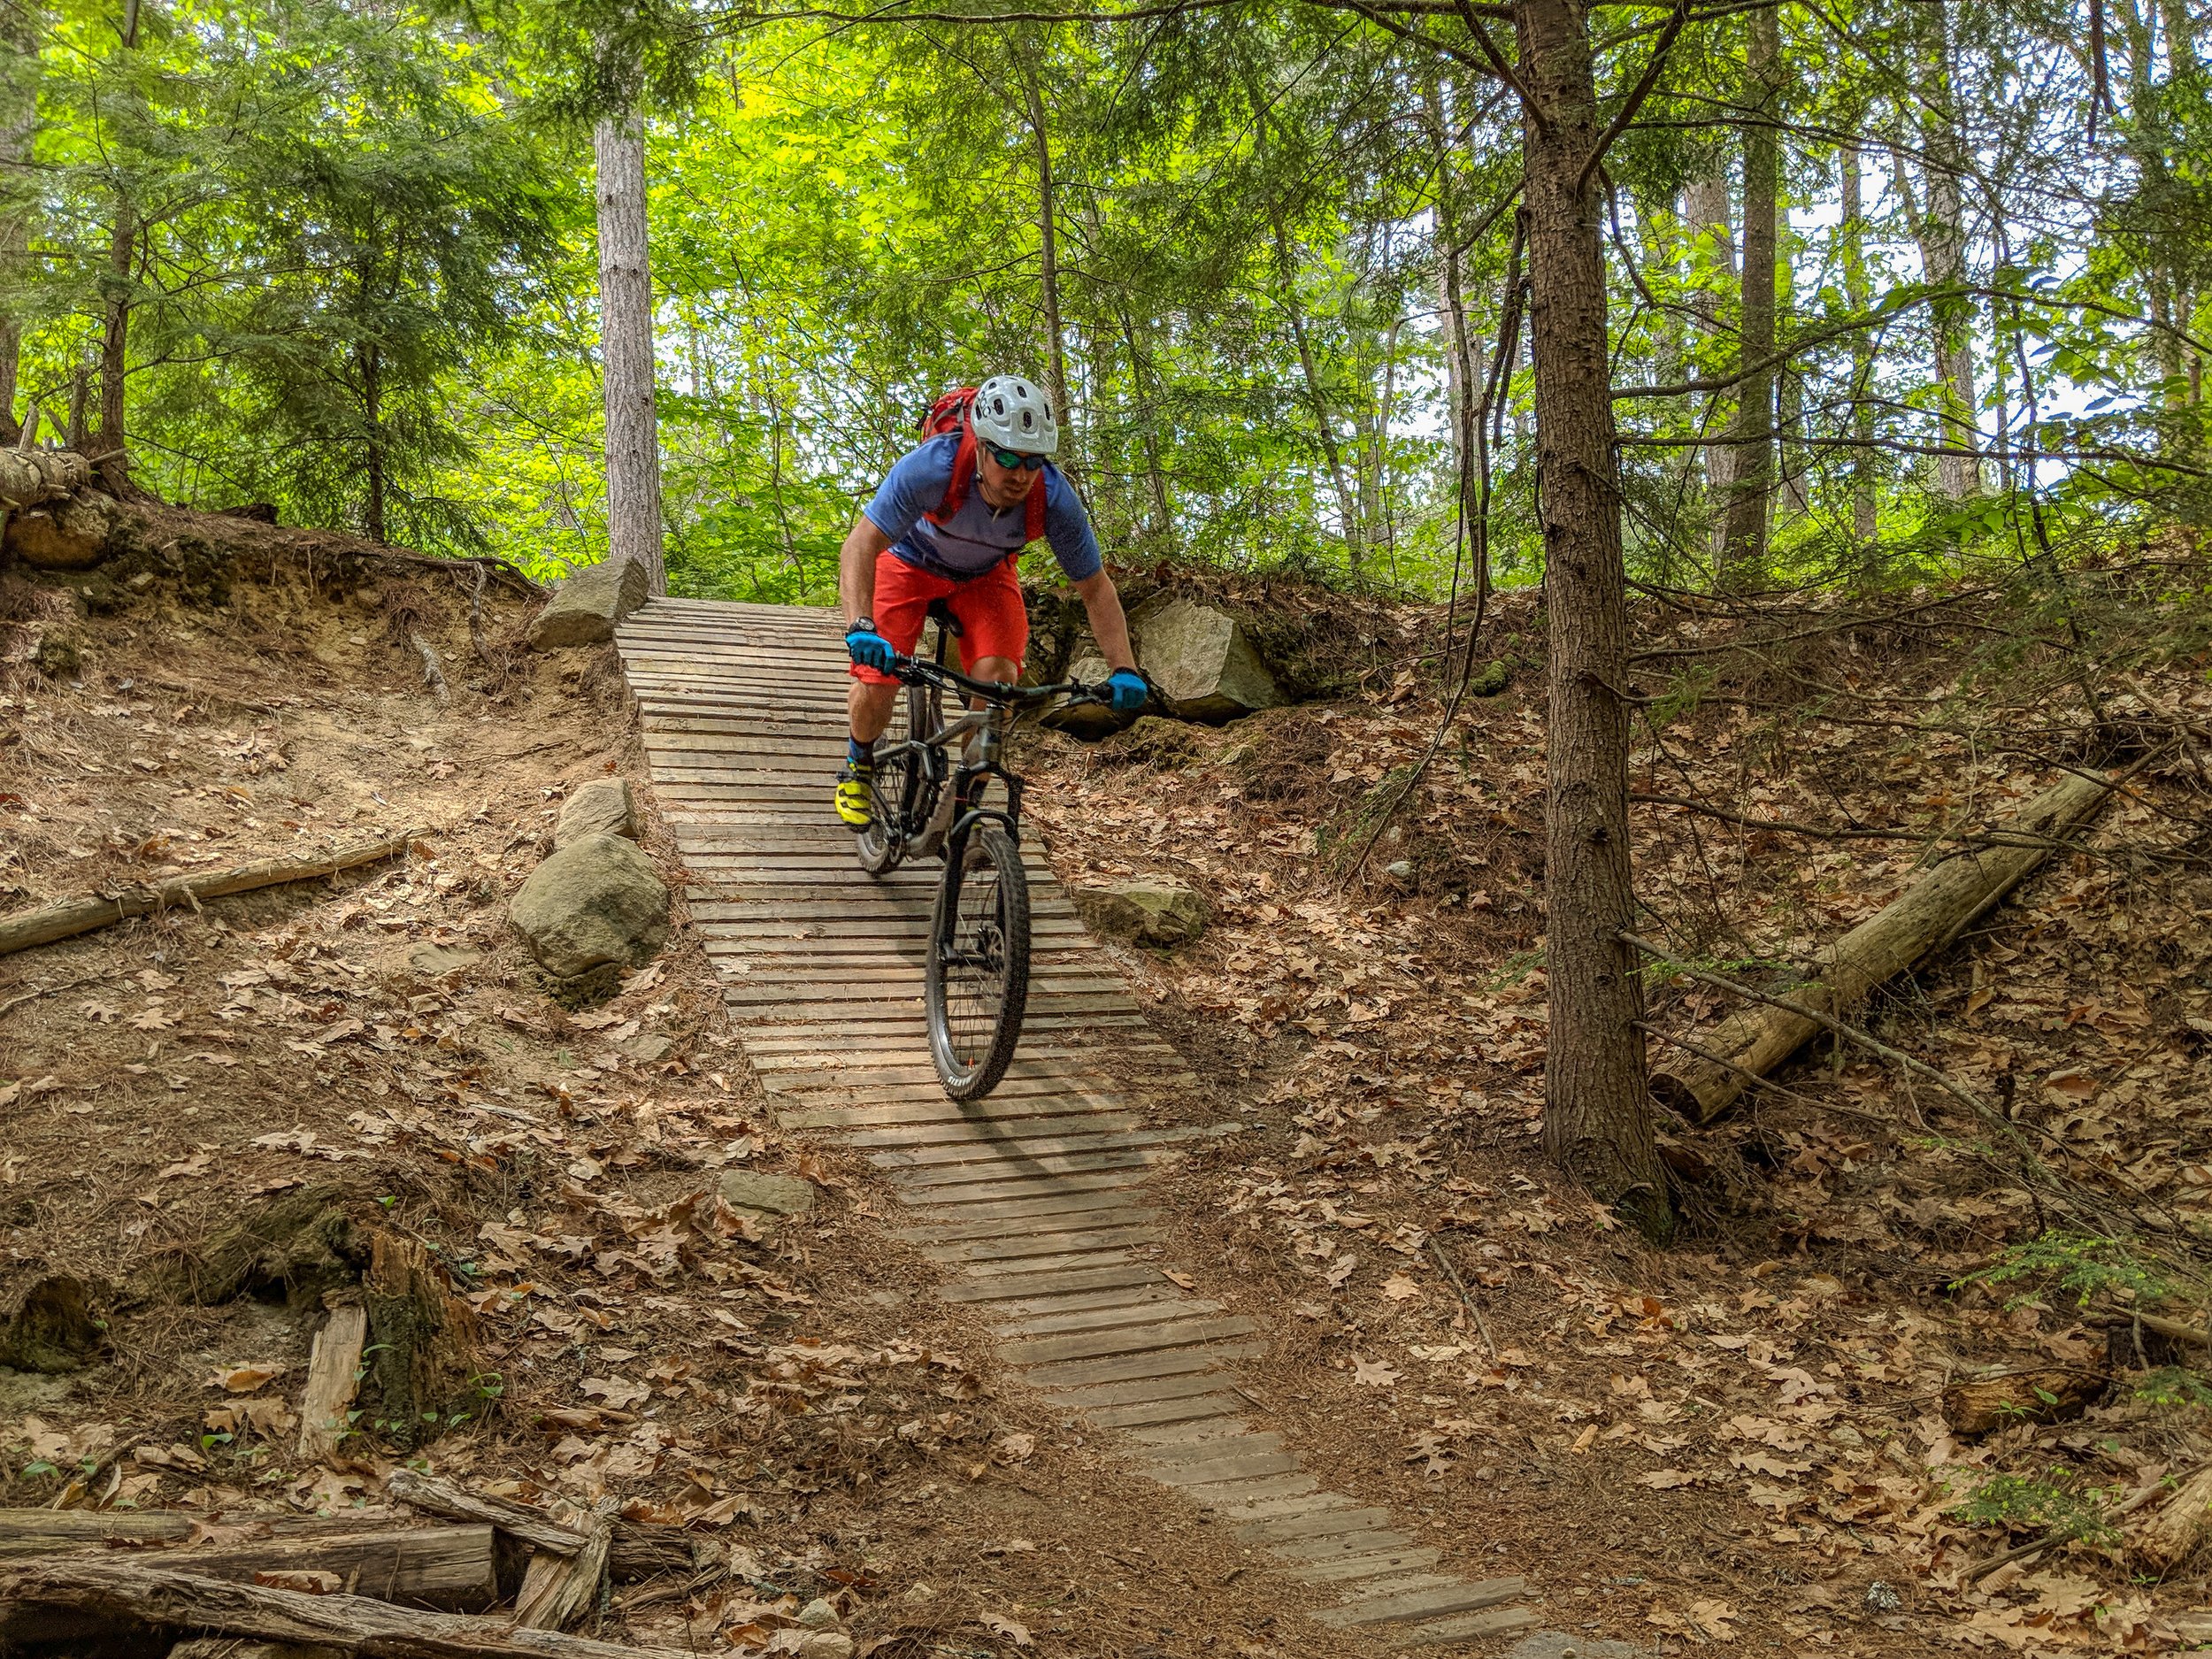 Yield to Fun: Why Descending Mountain Bikers Should Go First